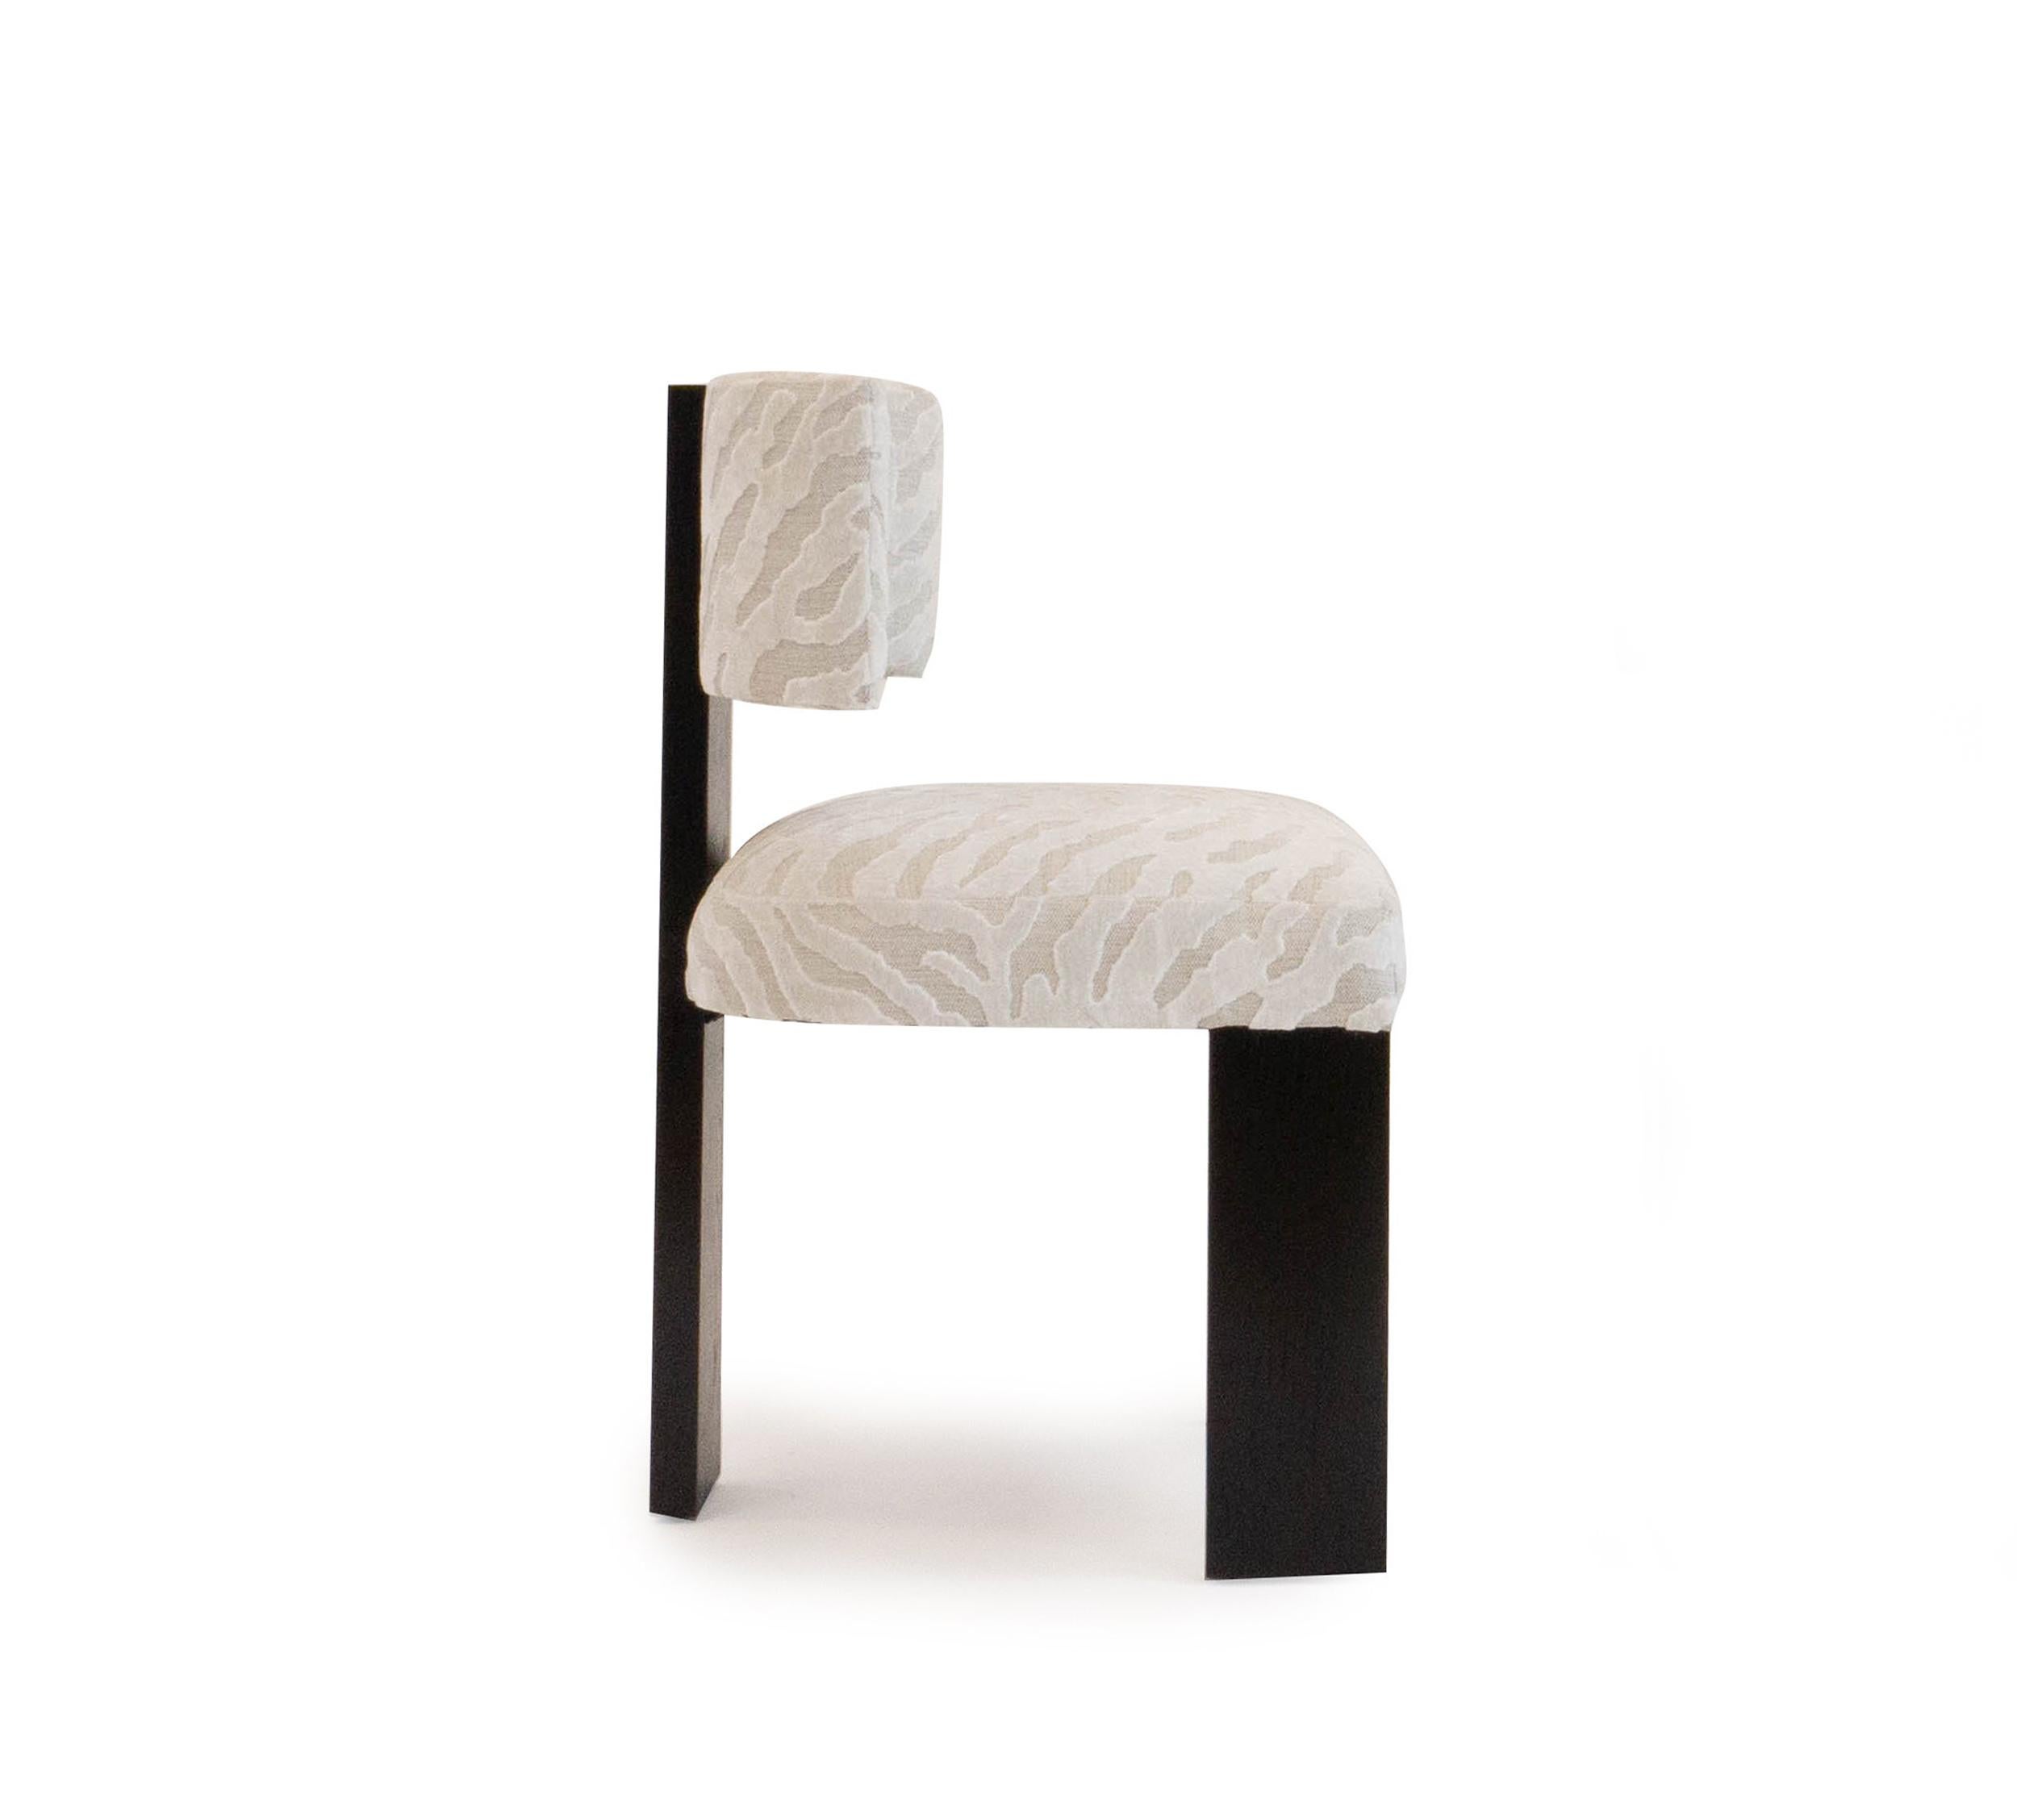 Our Marangoni dining chair is a comfortable modern dining chair with a white oak frame done in an ebony finish, shown in a Romo cut velvet. Customizable upon request. Made in our Connecticut workshop. Sold individually. 

Measurements:
Outside: 21